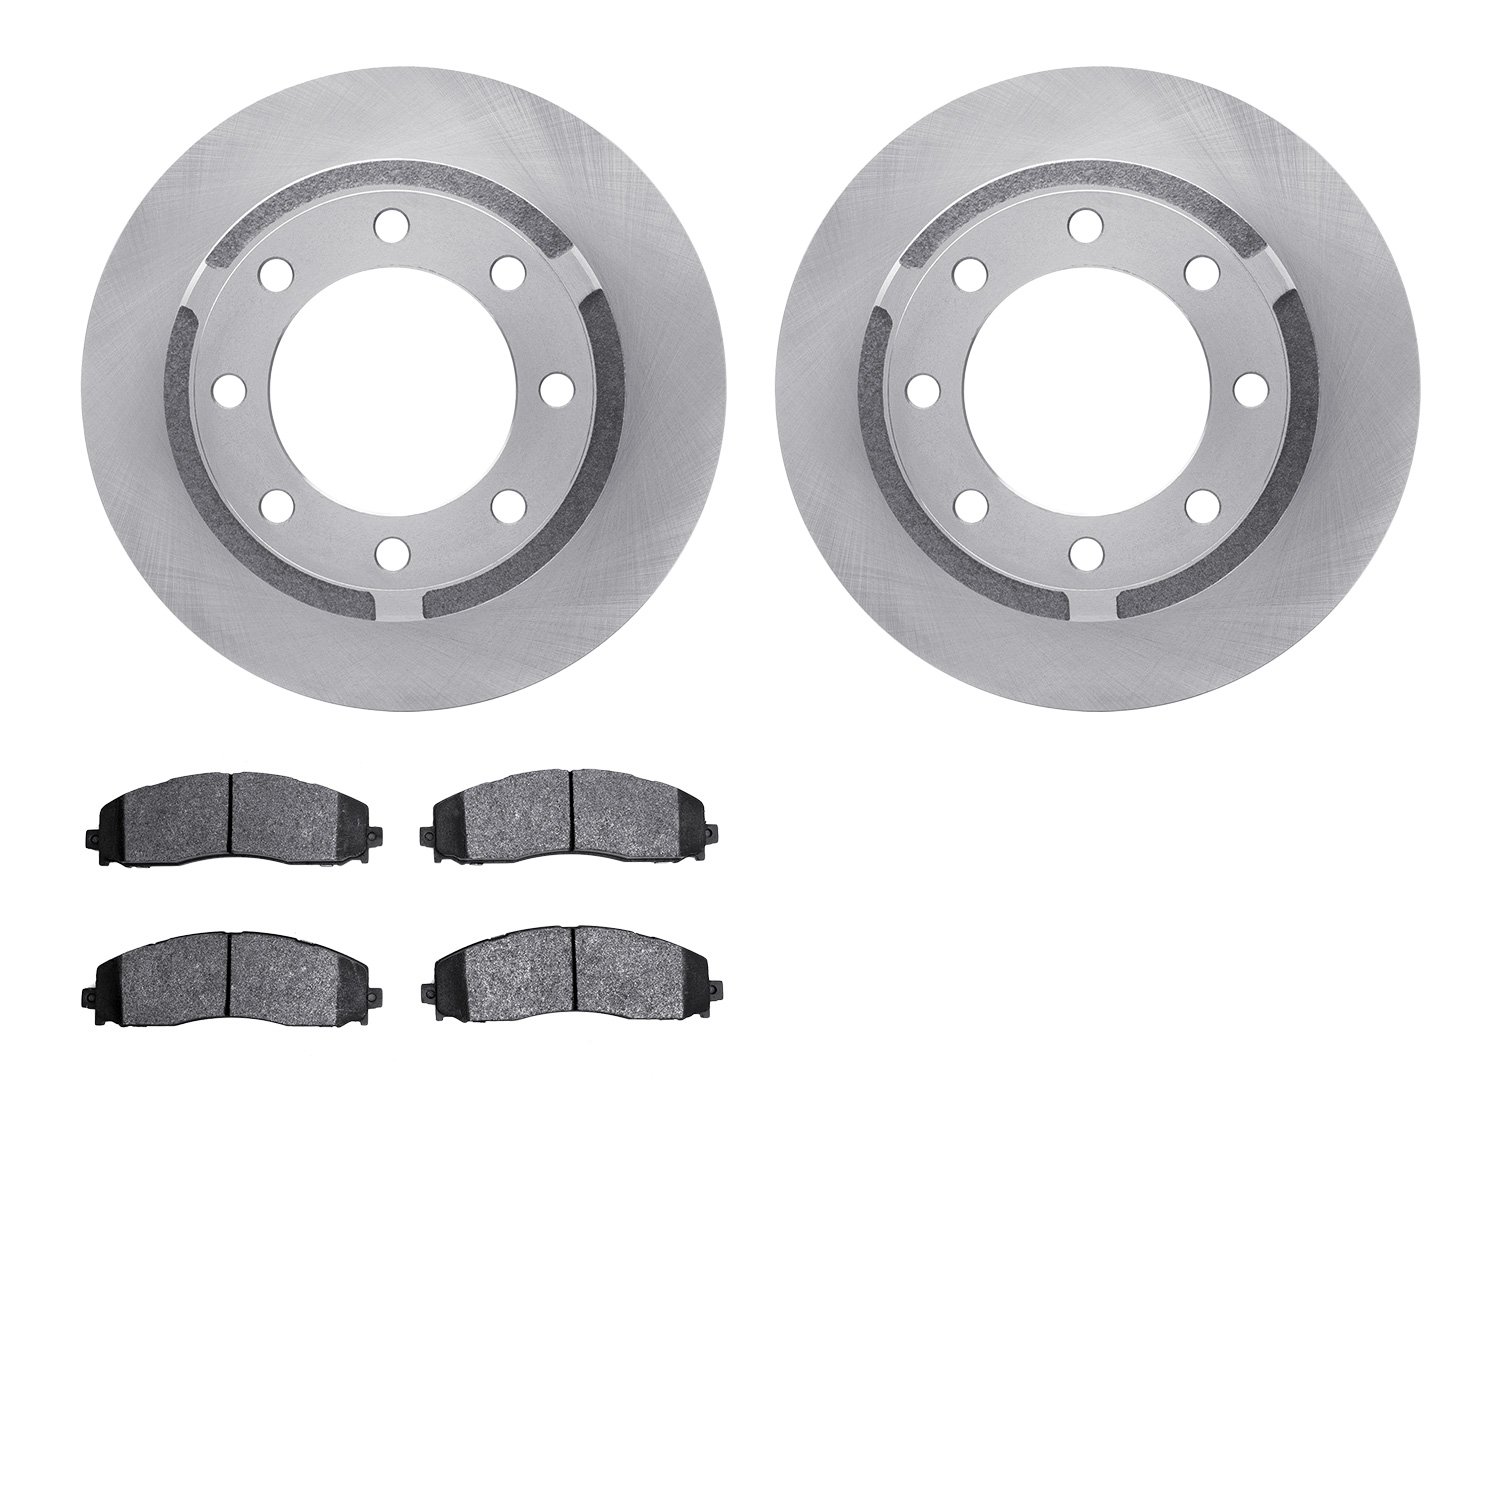 6402-54299 Brake Rotors with Ultimate-Duty Brake Pads, Fits Select Ford/Lincoln/Mercury/Mazda, Position: Rear